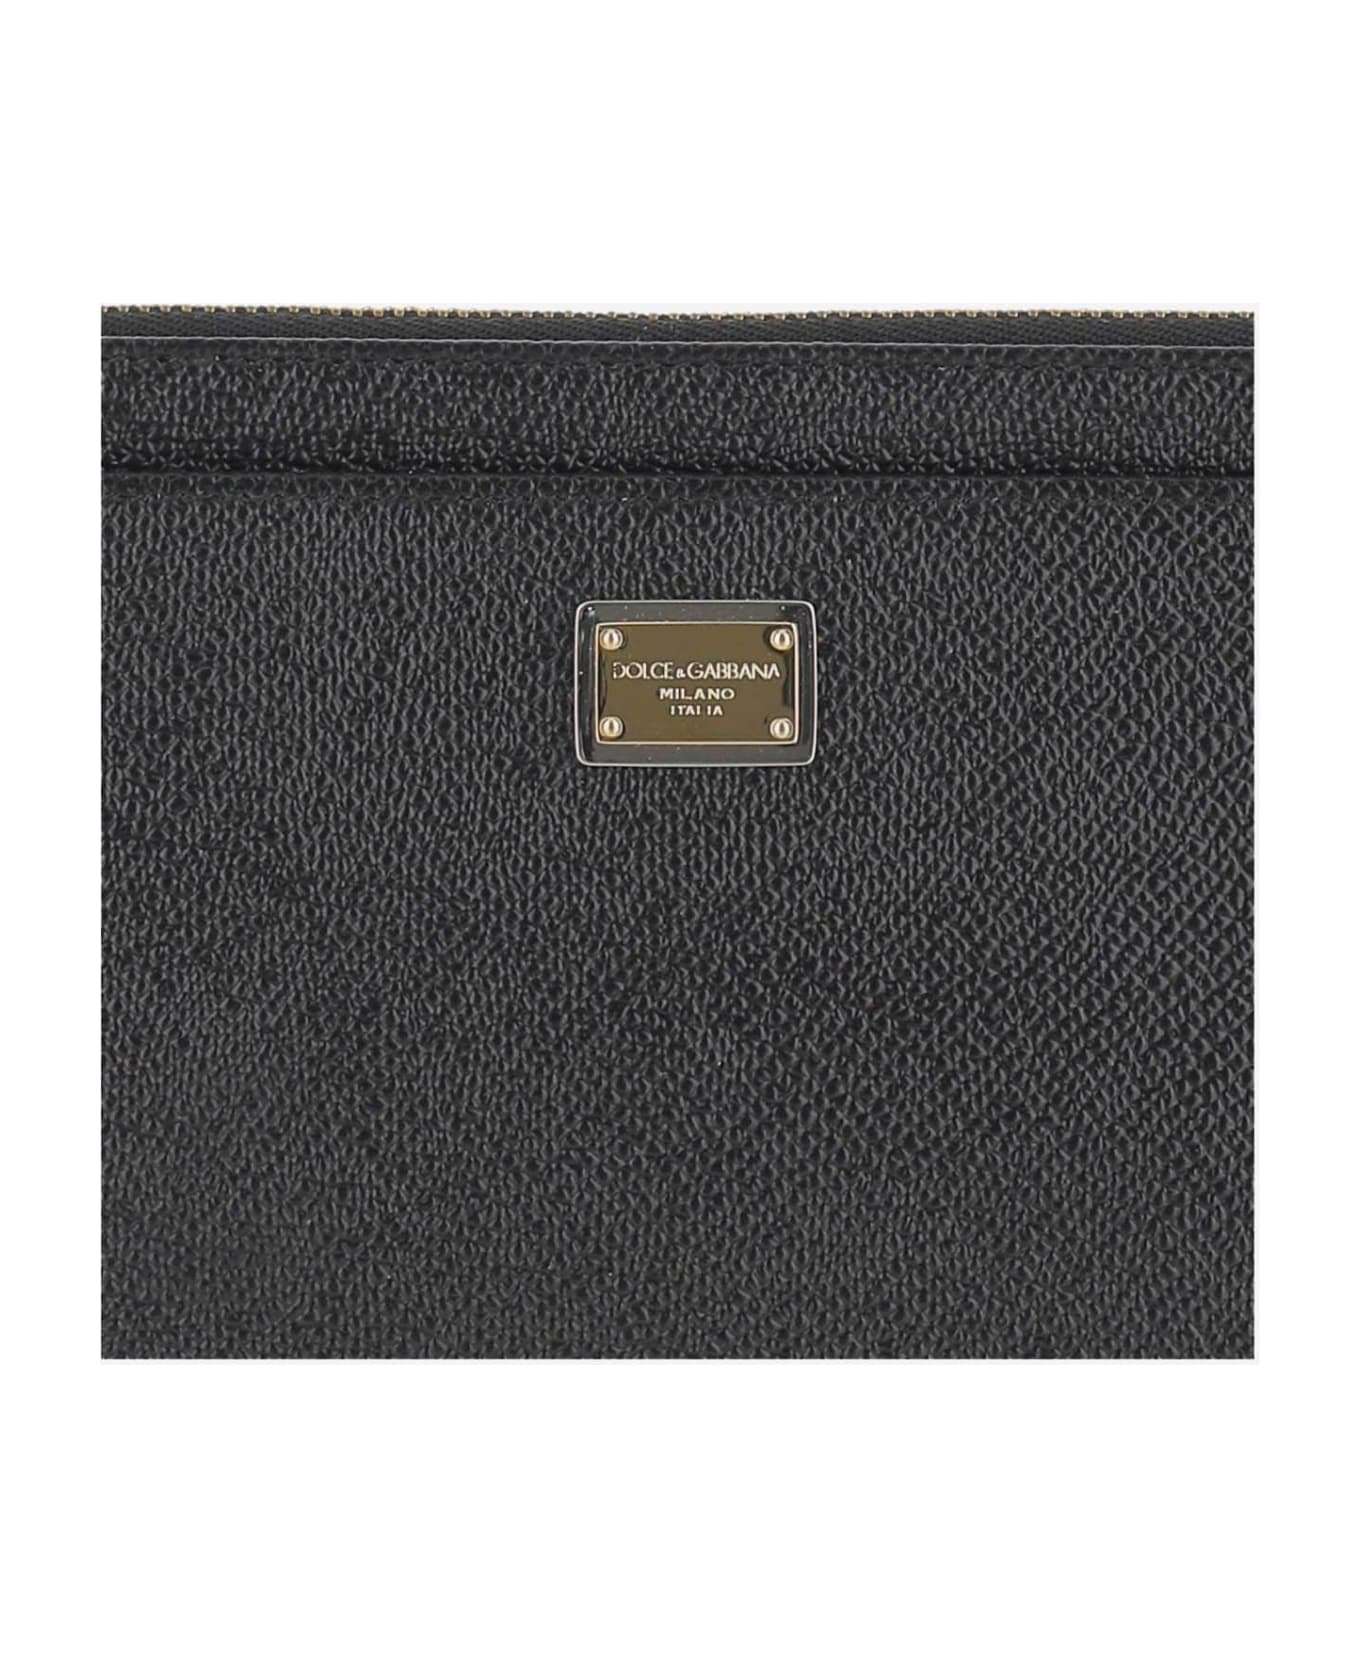 Dolce & Gabbana Dauphine Leather Card Case With Zipper - Black